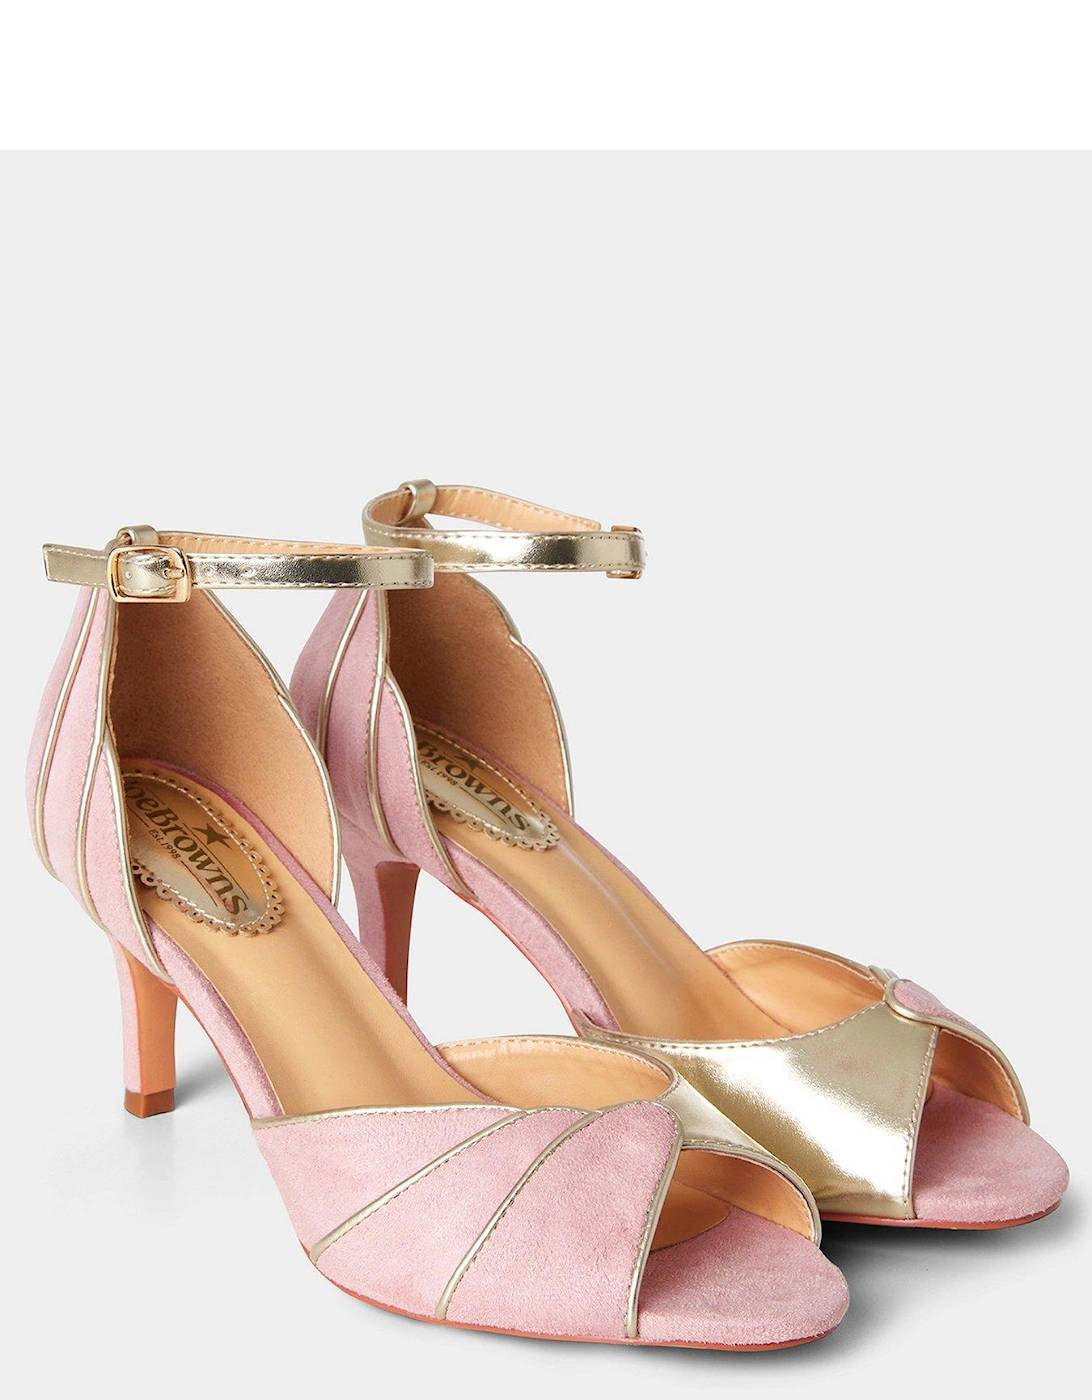 Art Deco Occasion Shoes - Pink